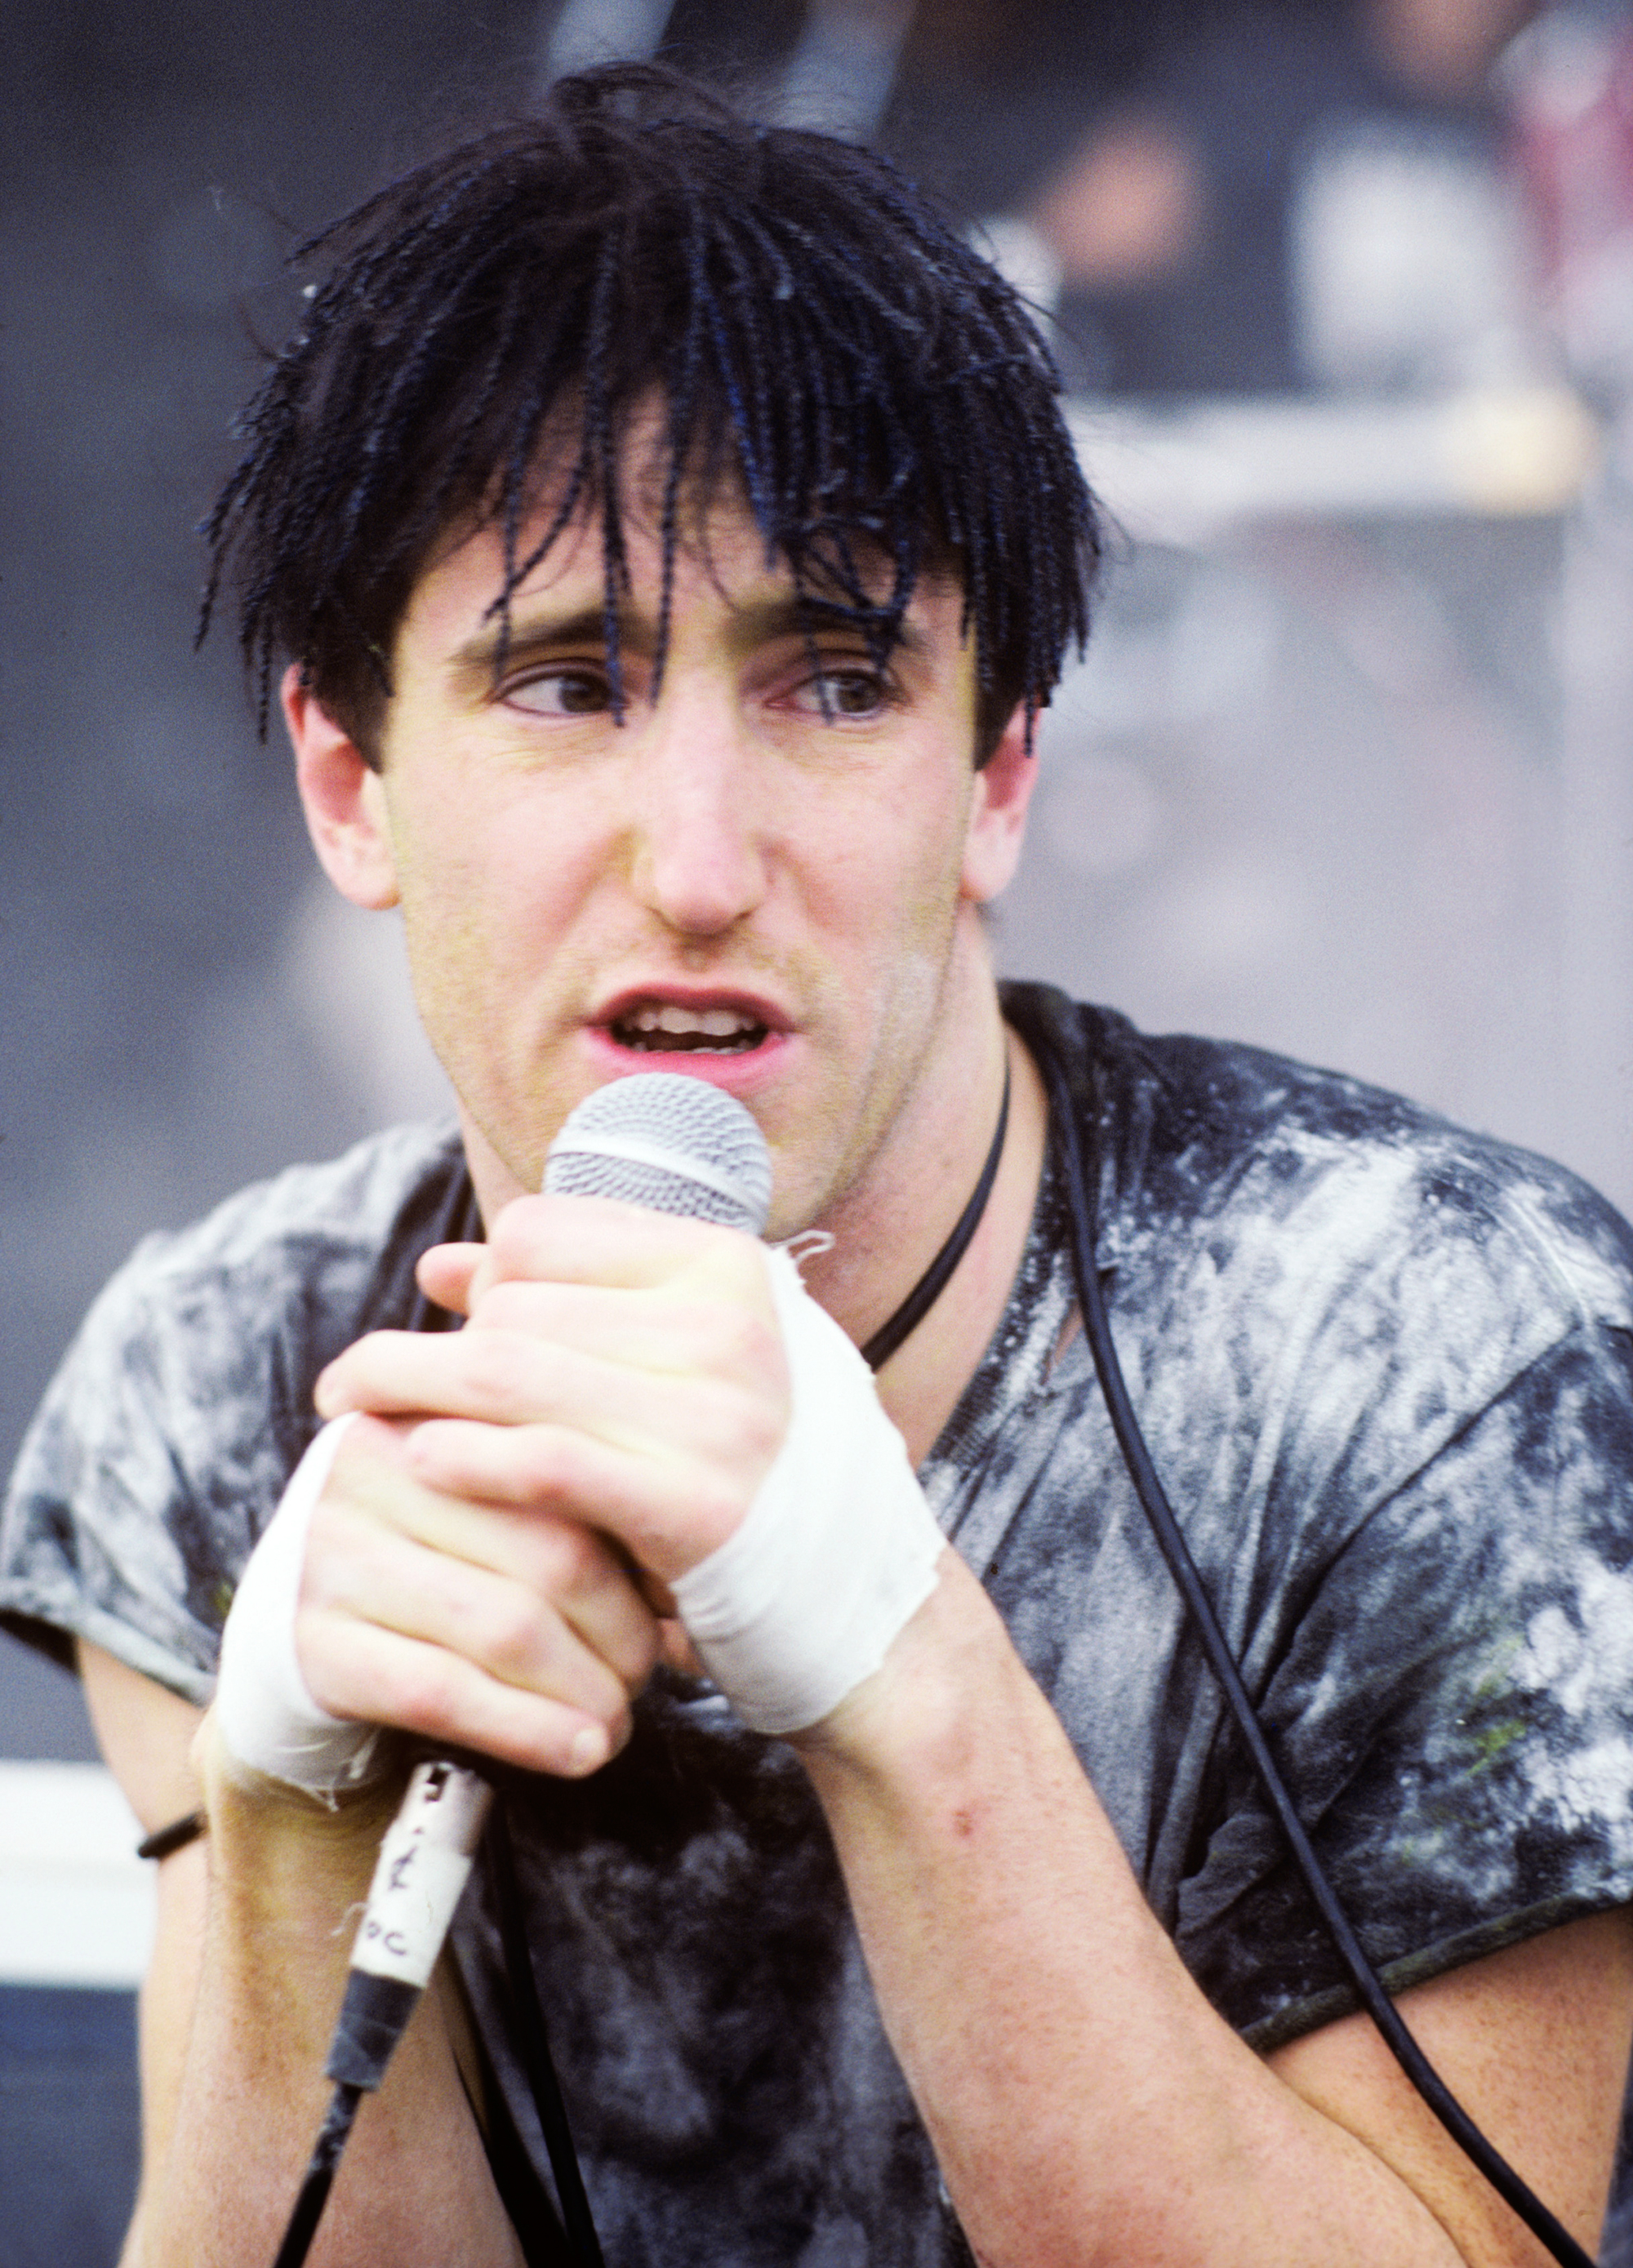 Trent Reznor performs with Nine Inch Nails in Waterloo Village, N.J., on Aug. 14, 1991.